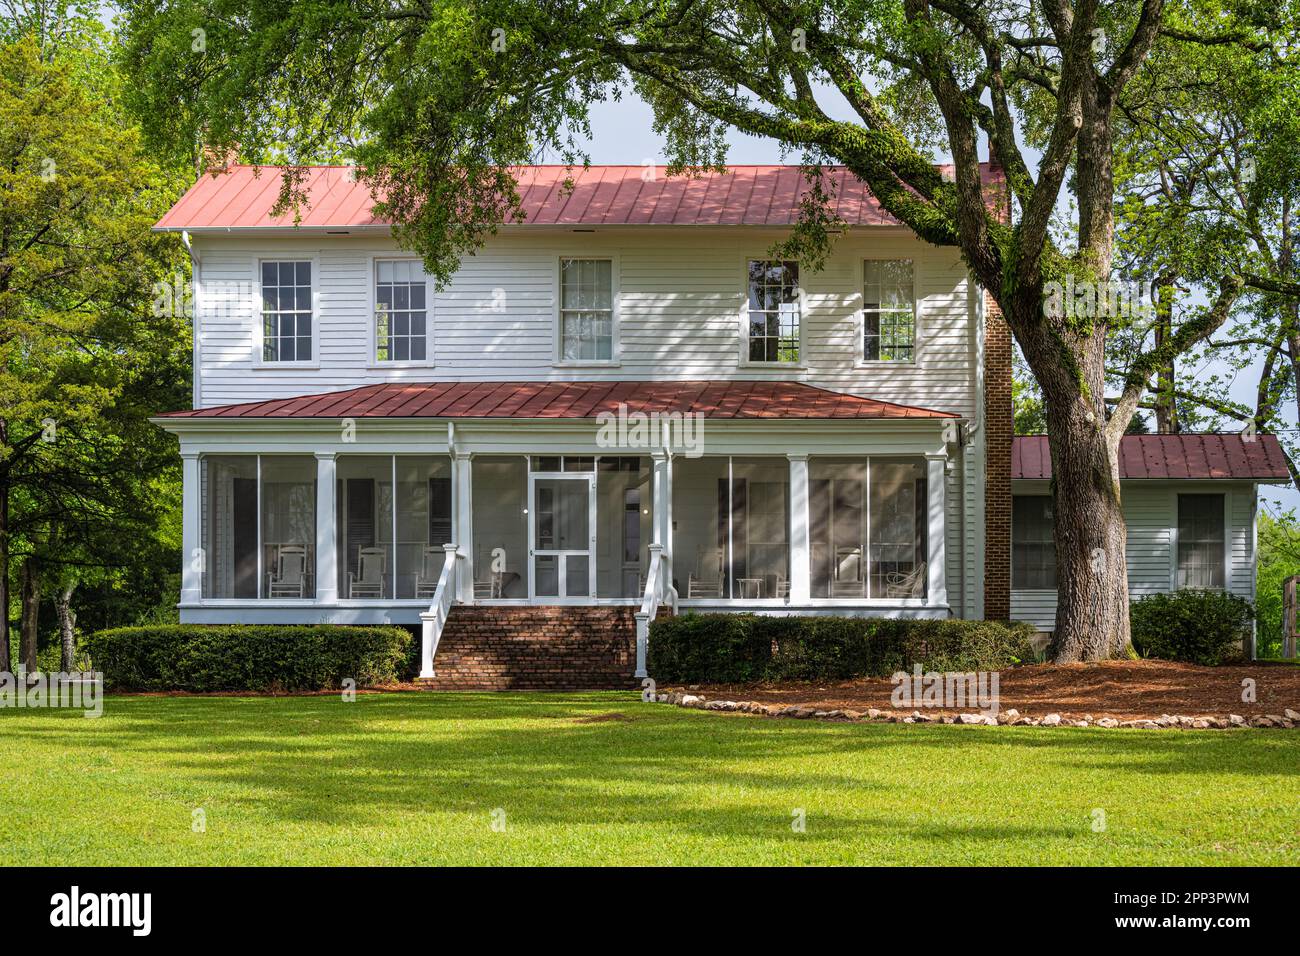 Andalusia, the historic home of American Southern gothic writer Flannery O'Connor in Milledgeville, Georgia. (USA) Stock Photo